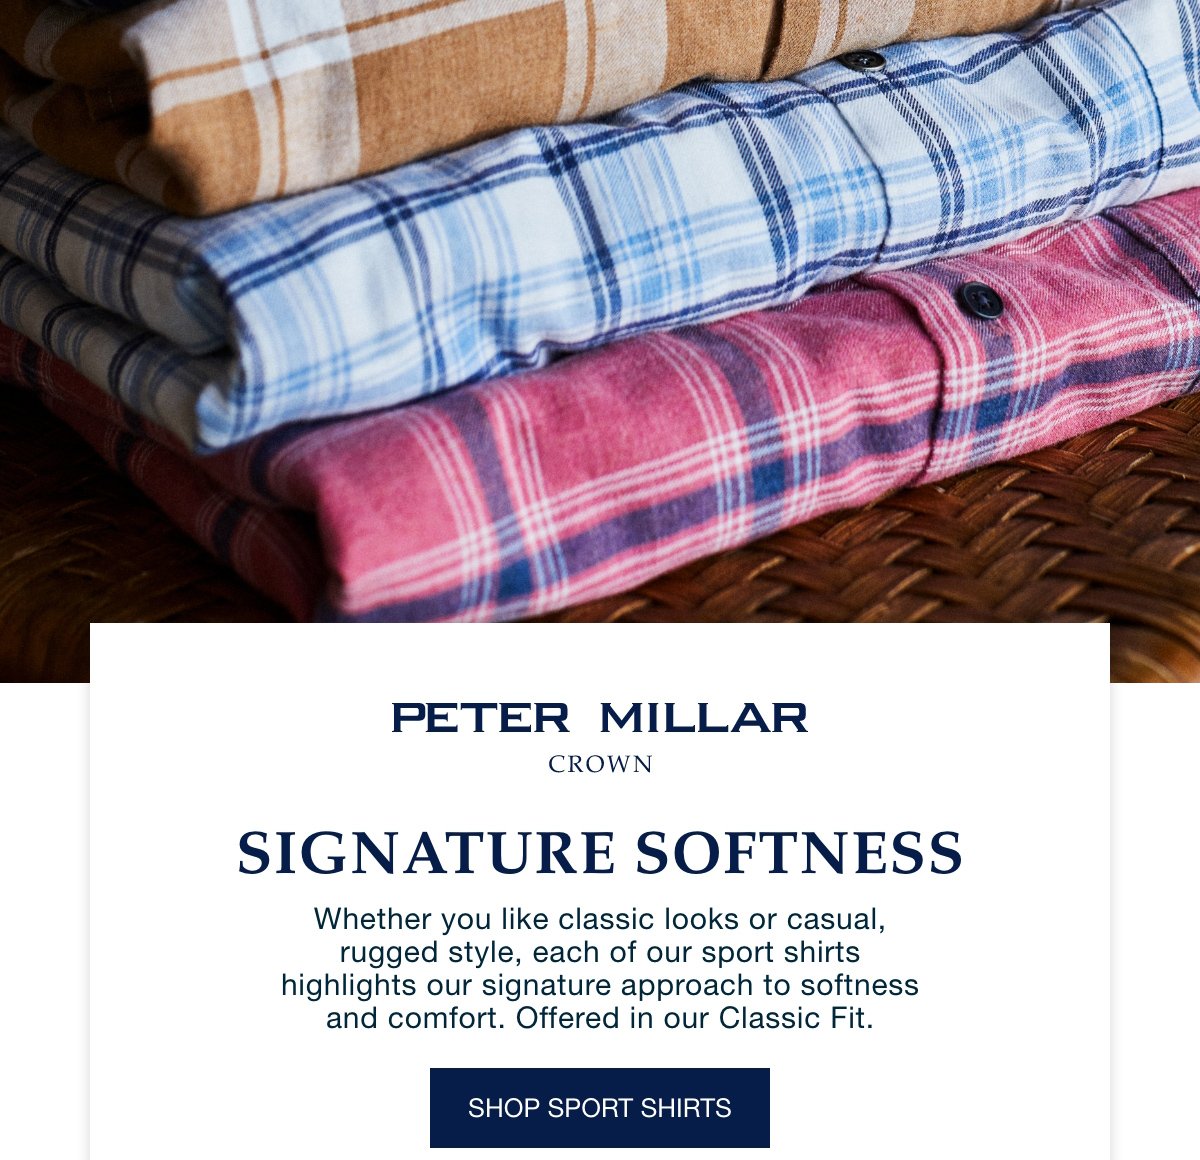 Enjoy Complimentary Shipping with code: AUG22 - Peter Millar Crown - Signature Softness - Shop Sport Shirts